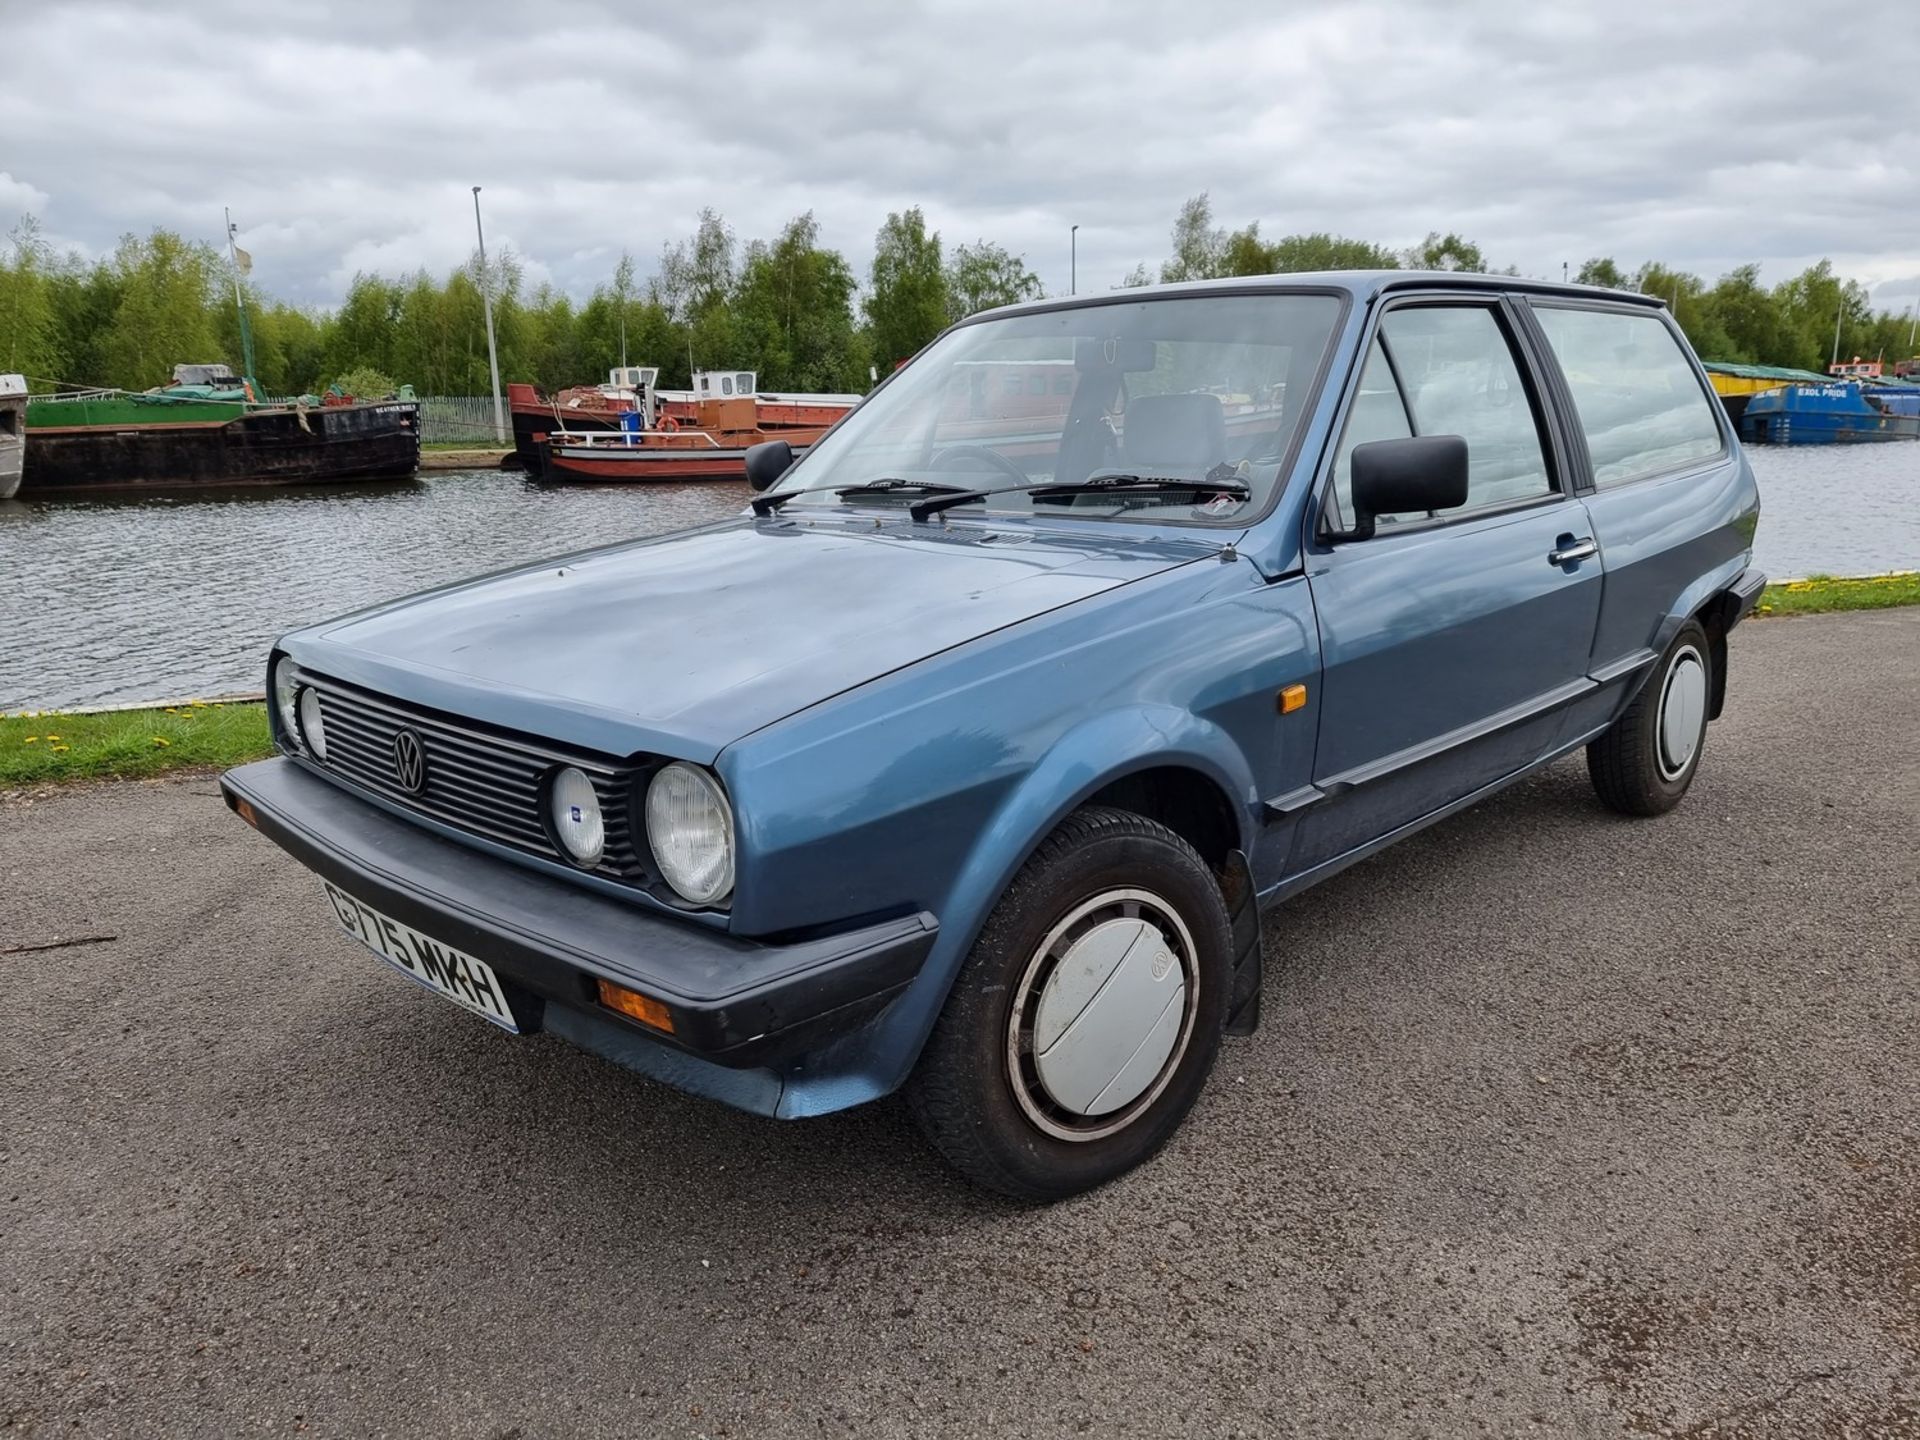 1989 VW Polo Mk2, 1272cc. Registration number G775 MKH. Chassis number WVWZZZ80ZKW168973. Engine - Image 2 of 16